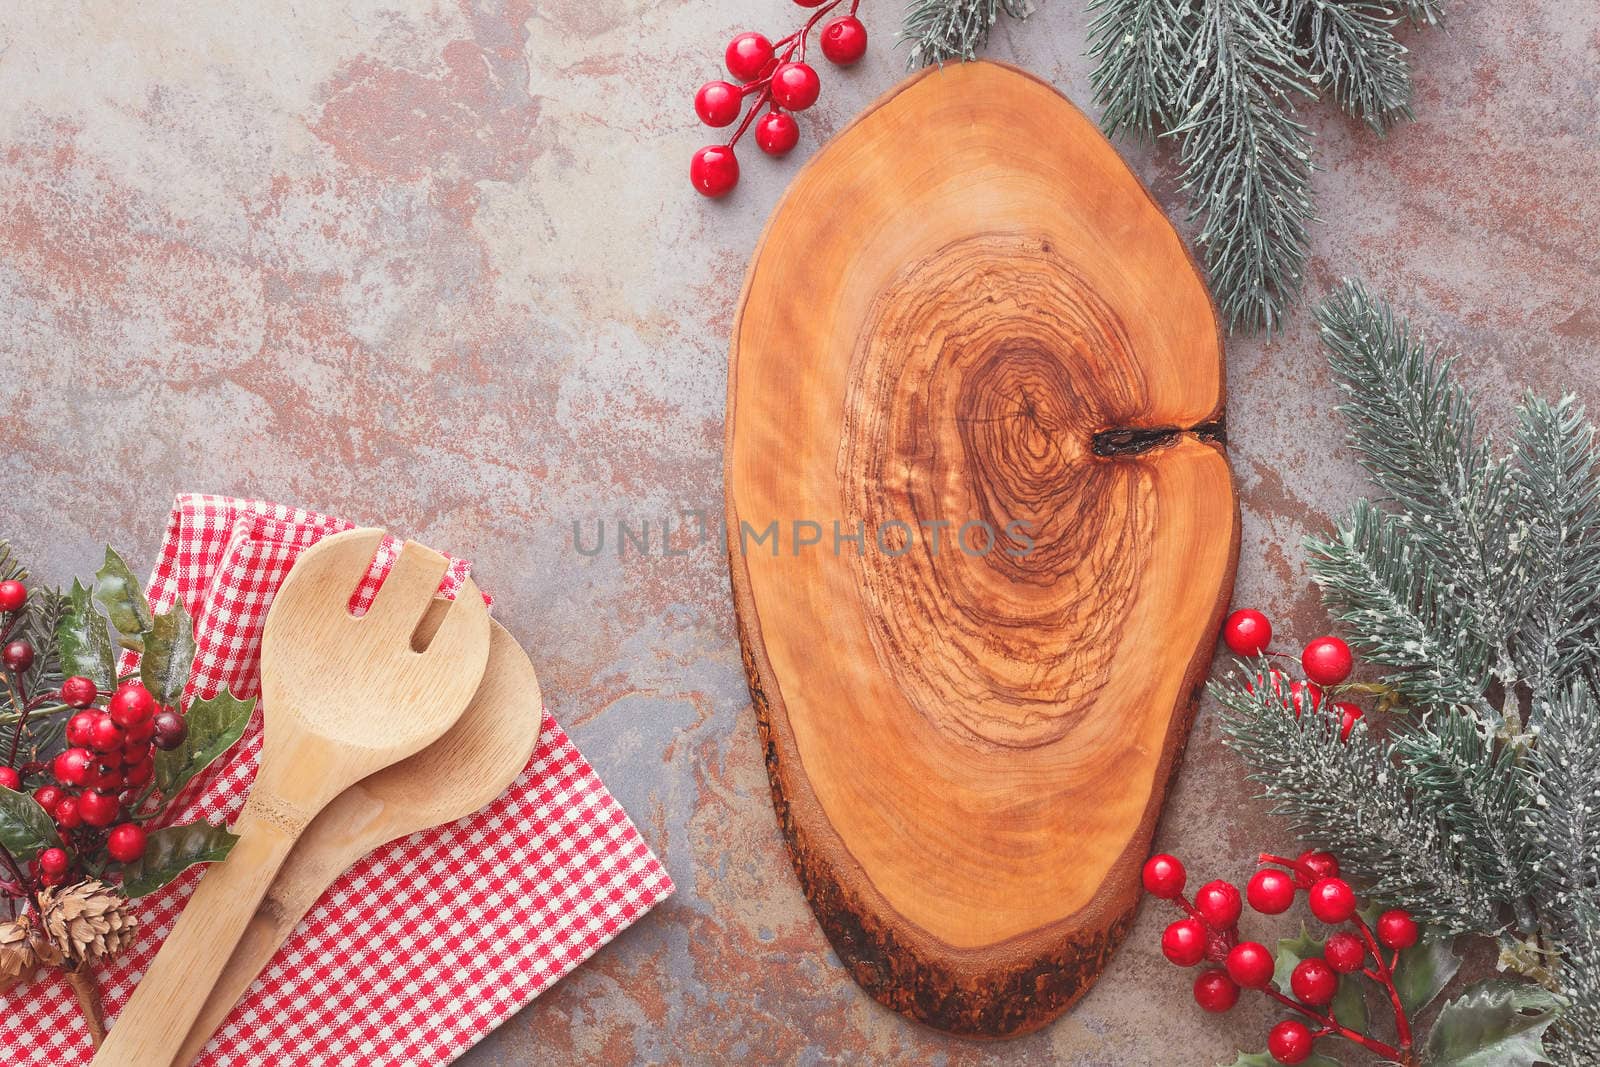 Old wooden kitchen utensils and cutting board on rustic table, Christmas cooking concept. Top view, vintage style, blank space